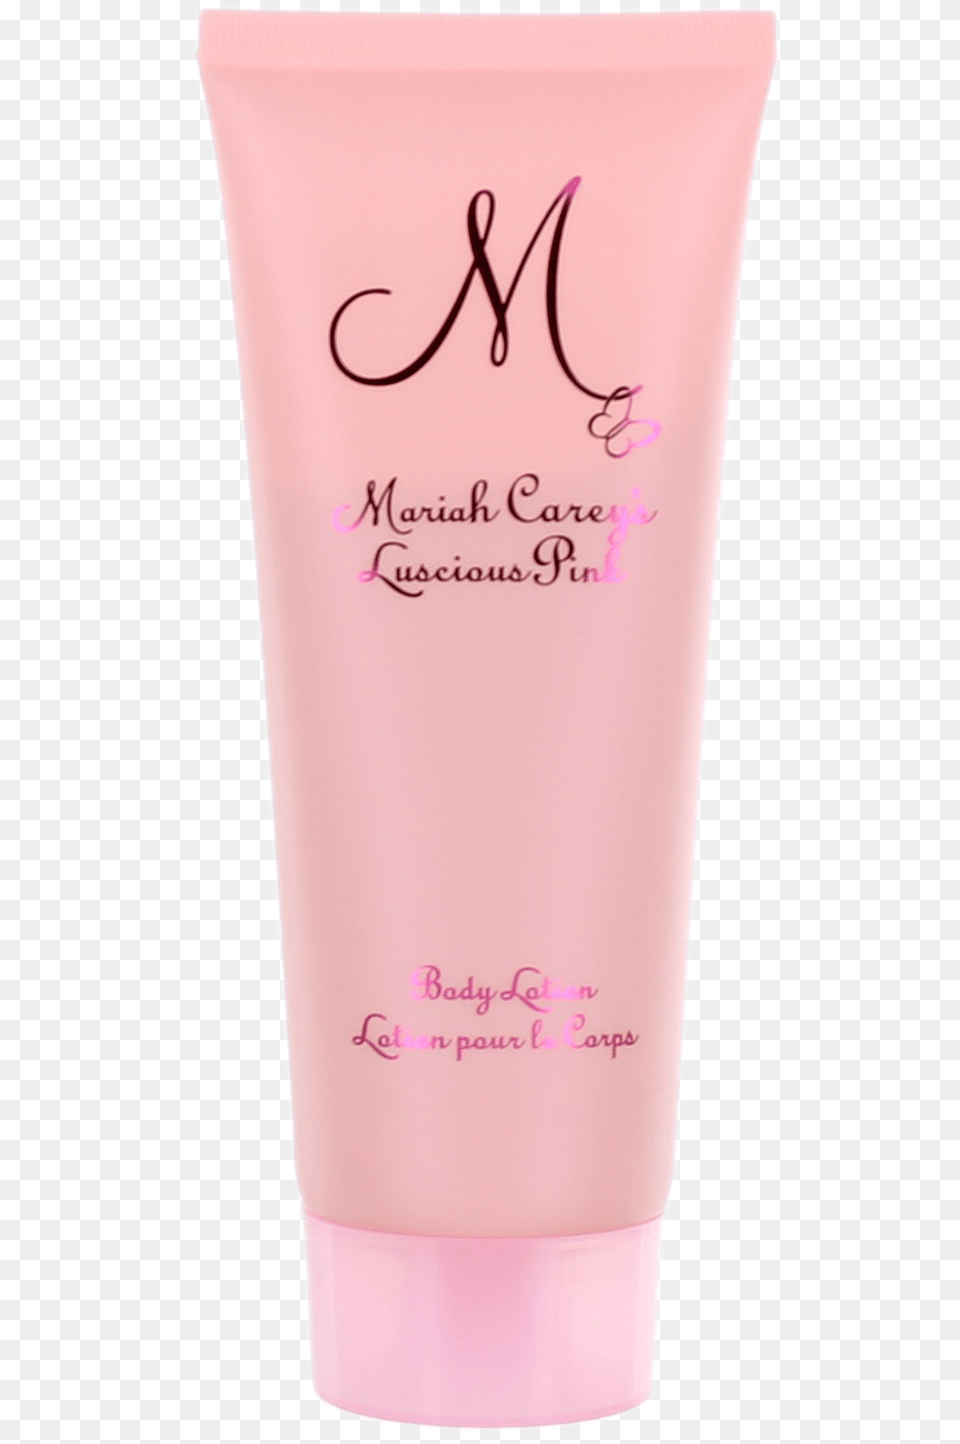 Lucious Pink By Mariah Carey For Women Body Lotion Lotion, Bottle, Cosmetics Png Image